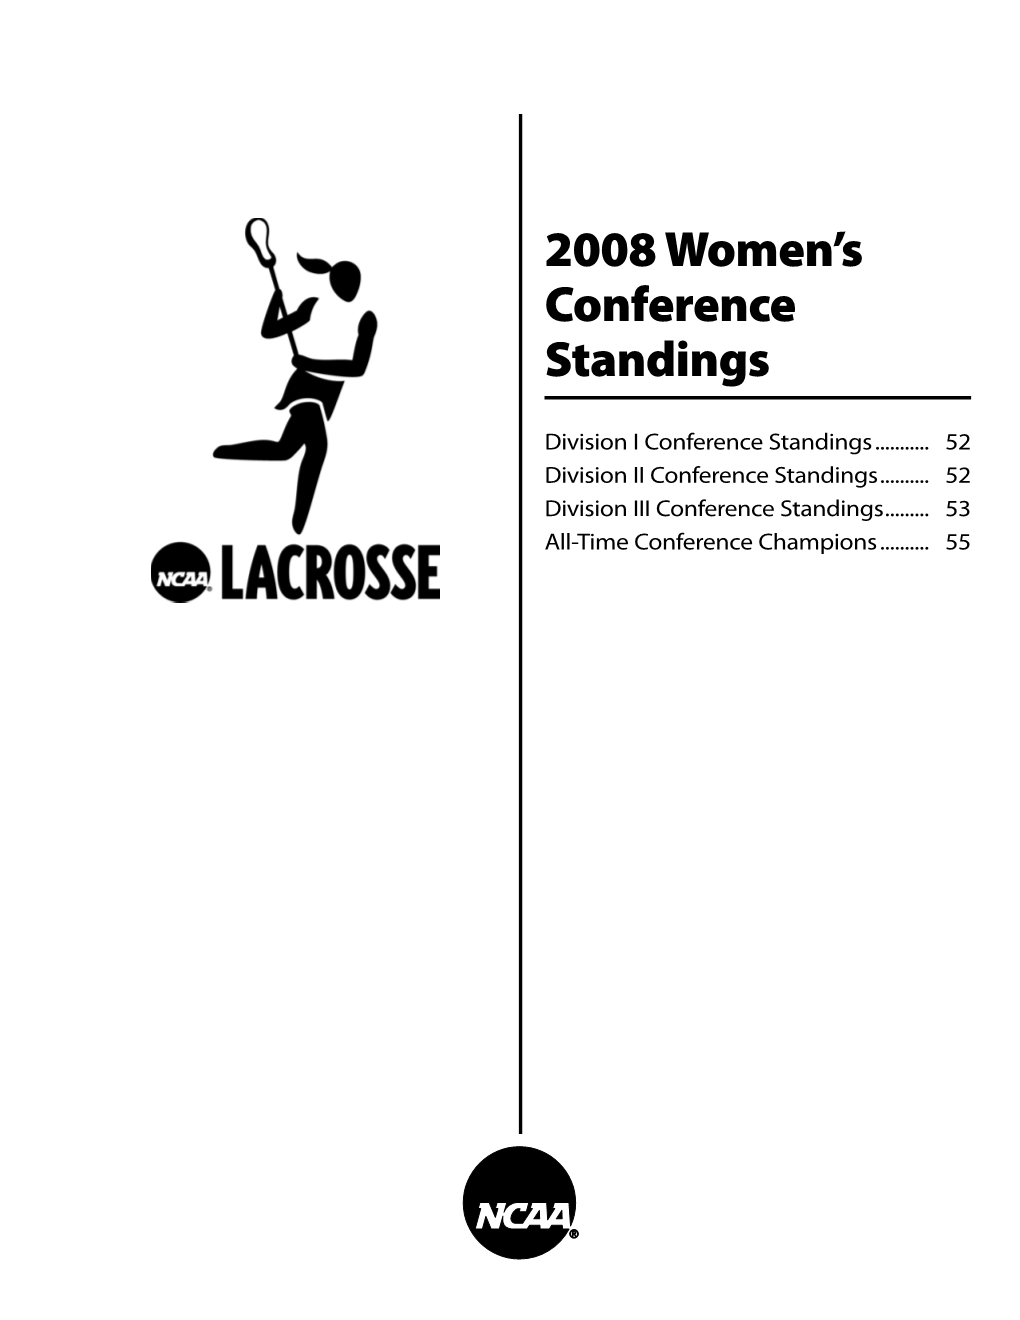 2008 Conference Standings